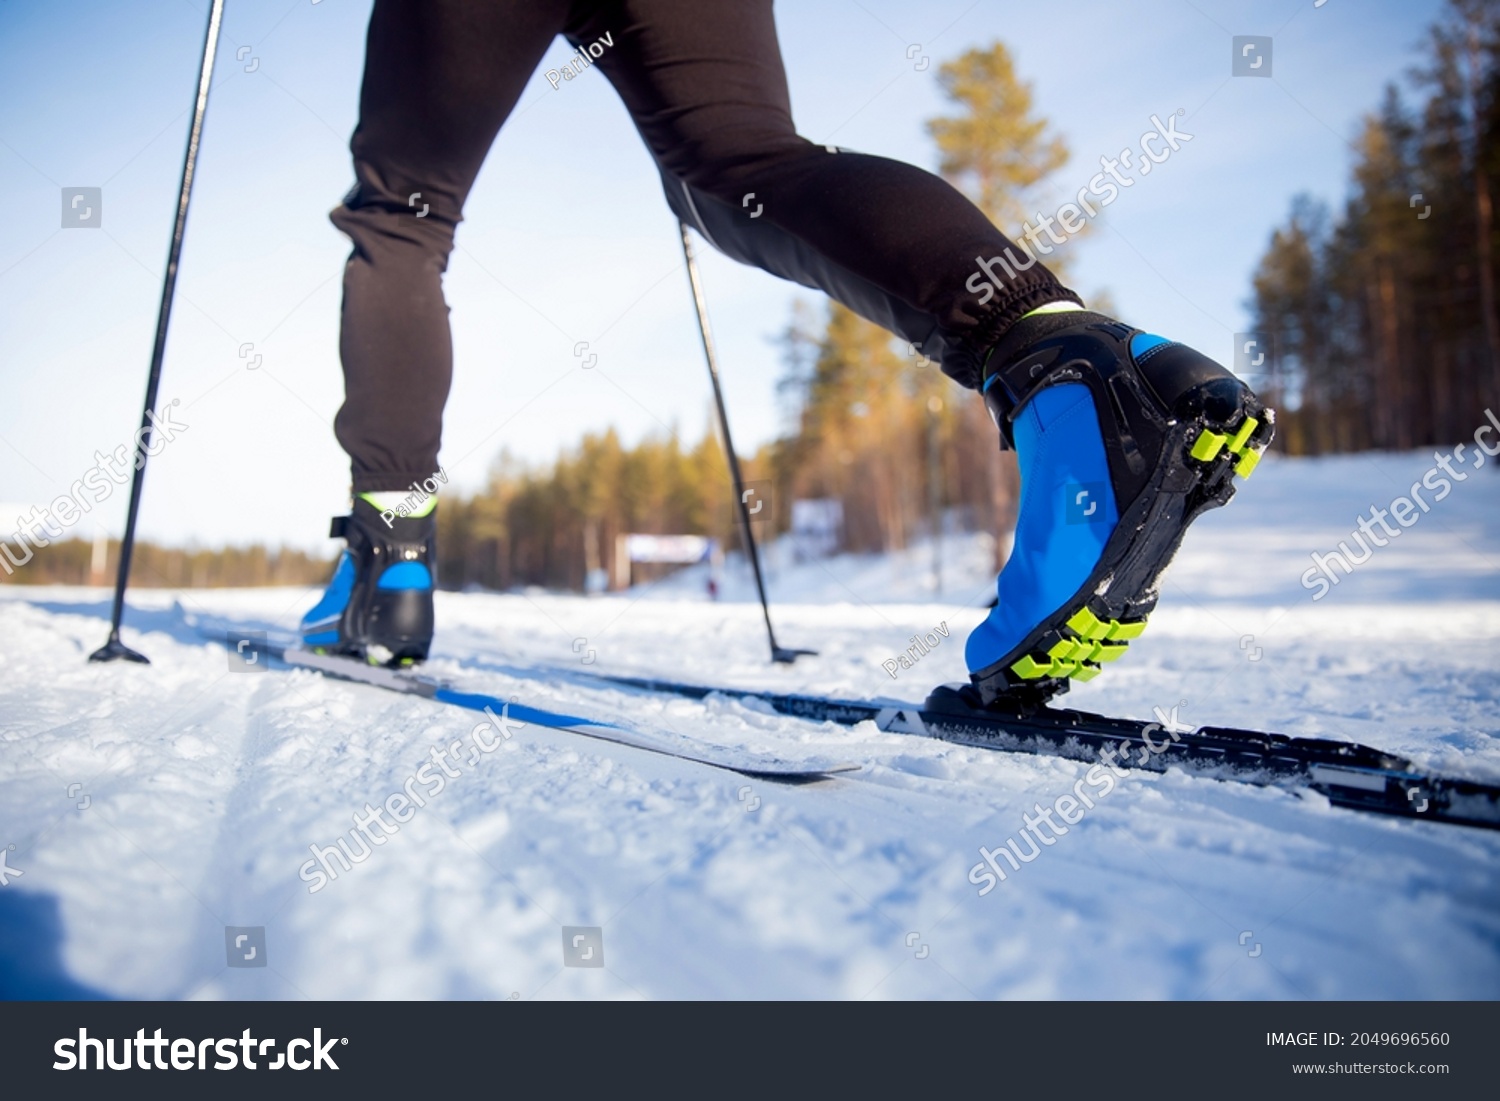 Winter sports competitions, boots and sticks cross of country skis glide on fresh snow. #2049696560